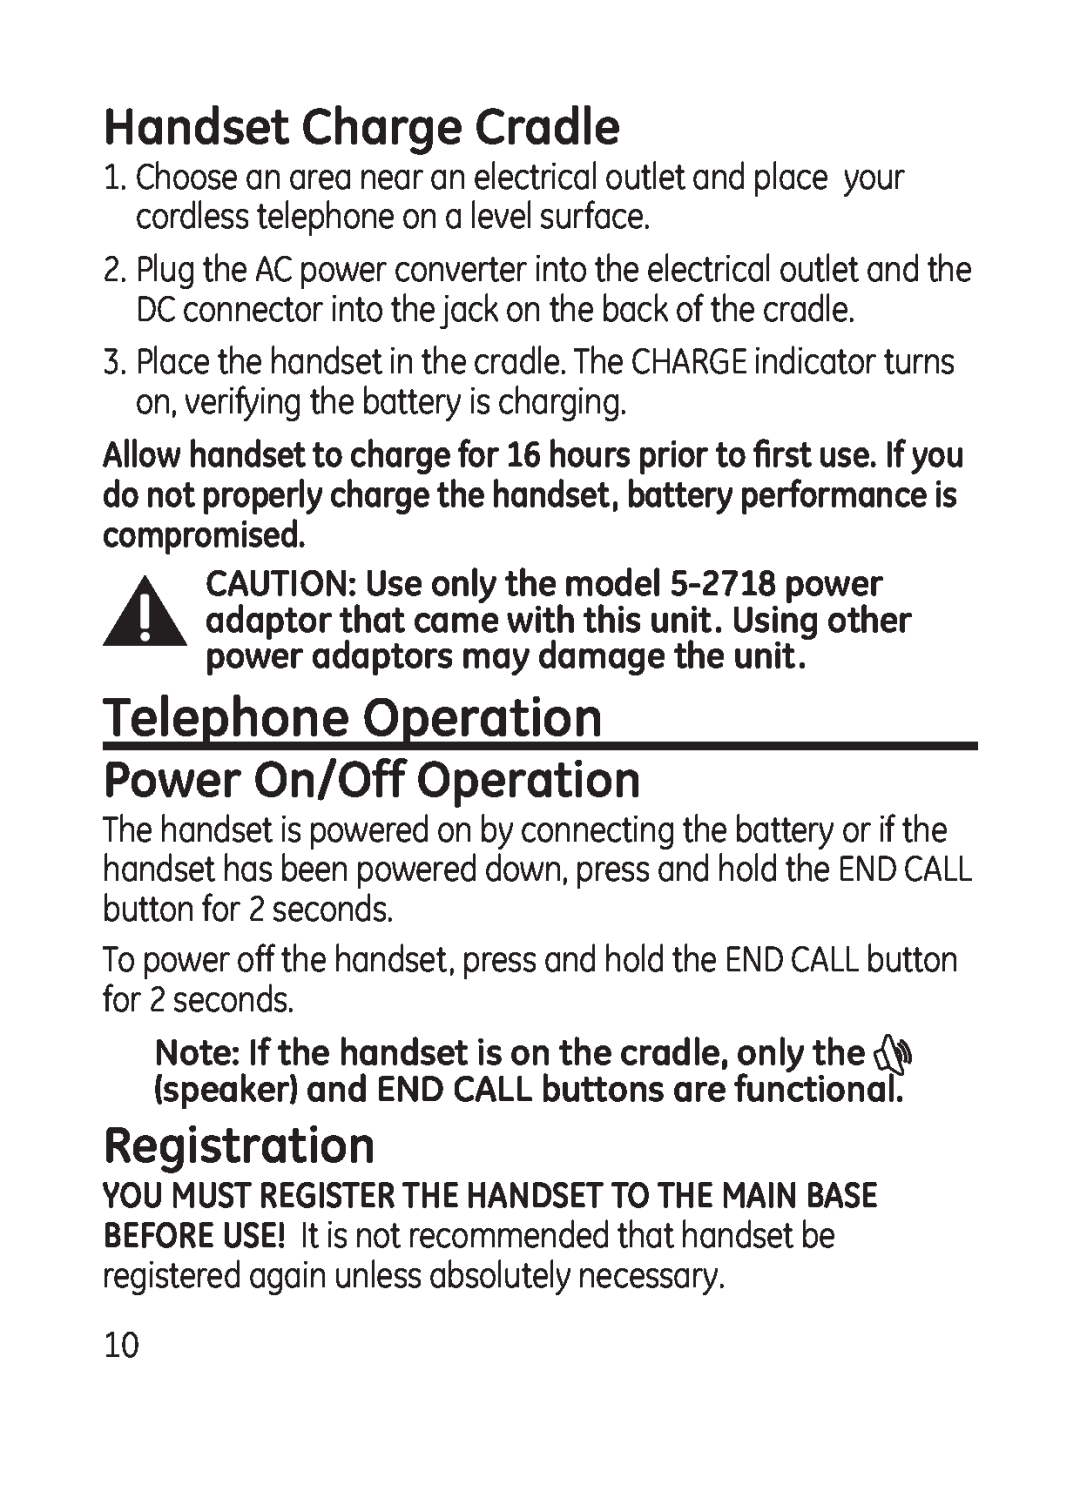 GE 28301 manual Telephone Operation, Handset Charge Cradle, Power On/Off Operation, Registration 